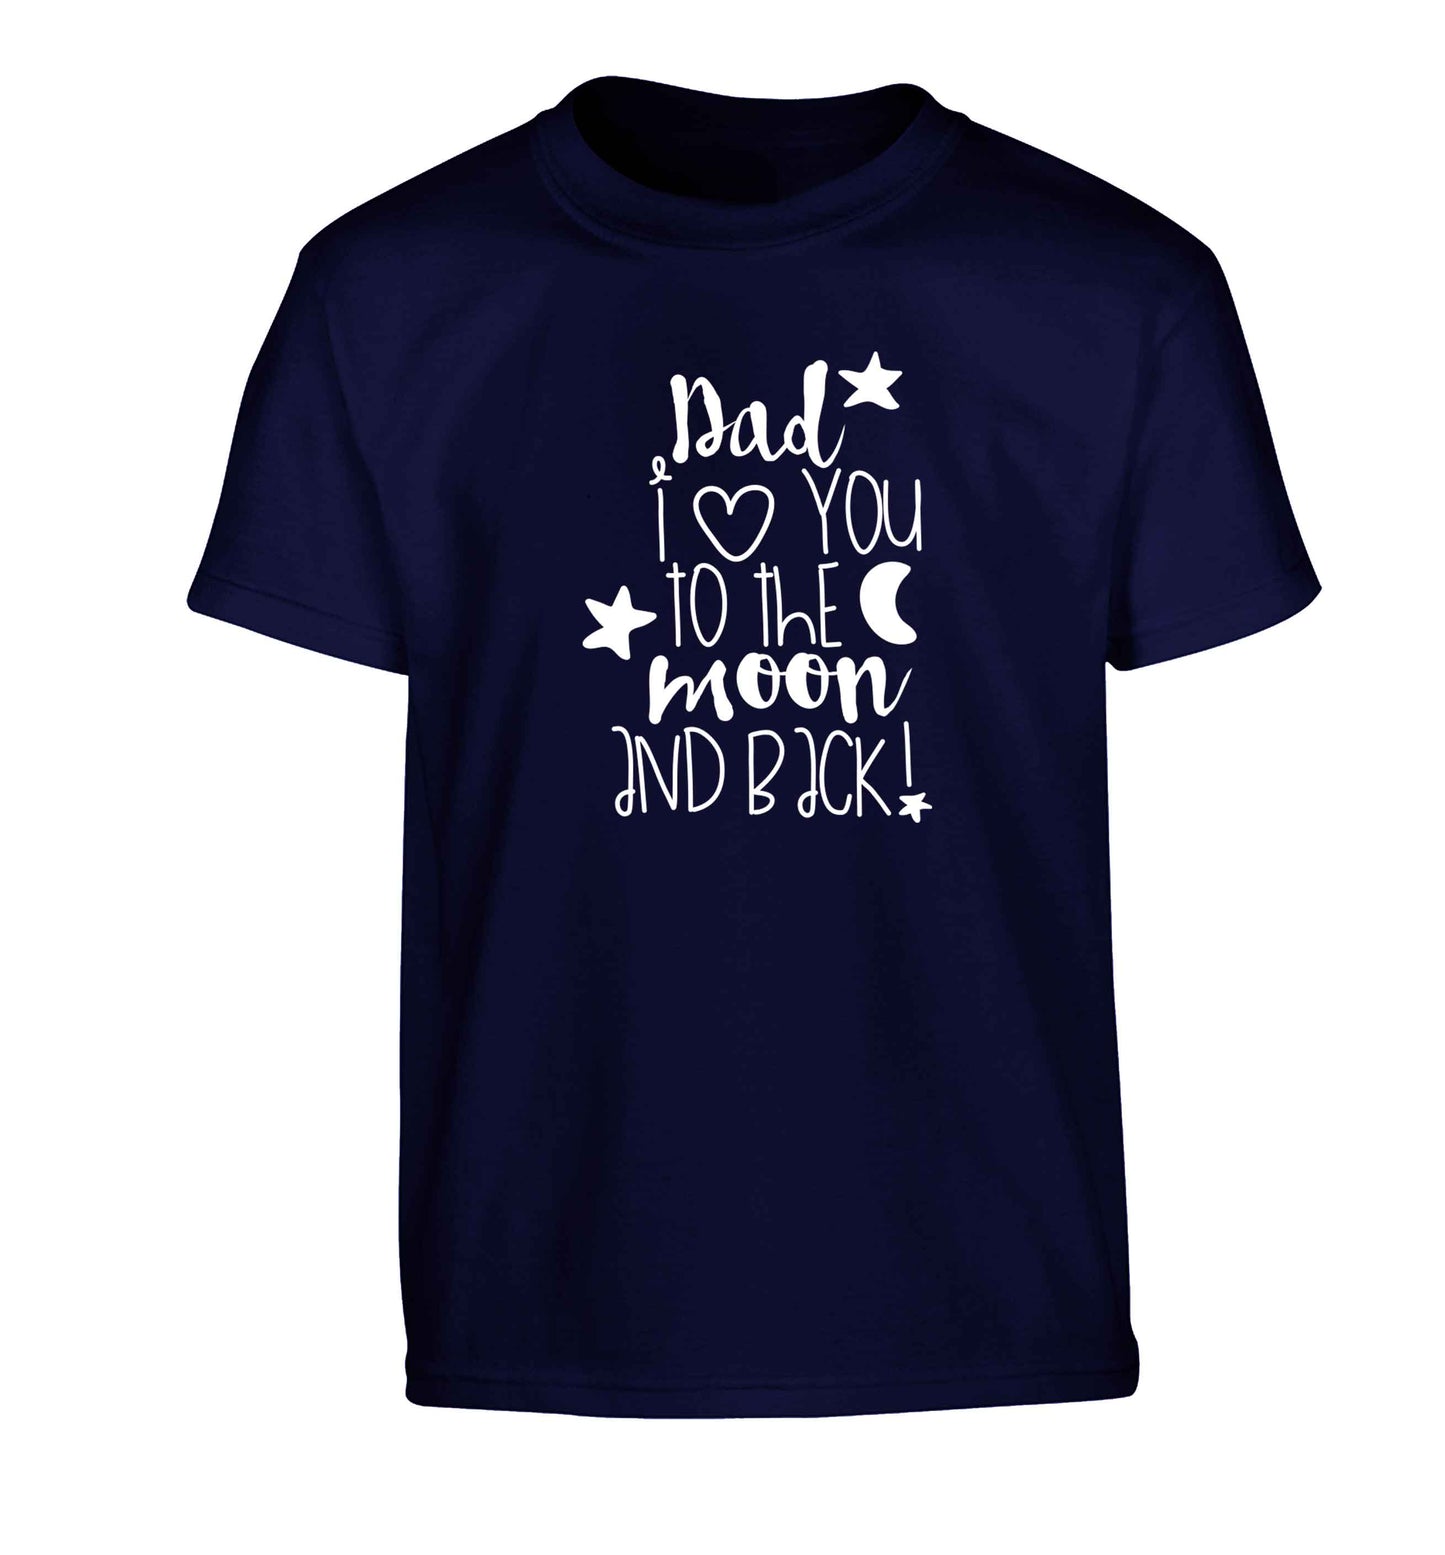 Dad I love you to the moon and back Children's navy Tshirt 12-13 Years